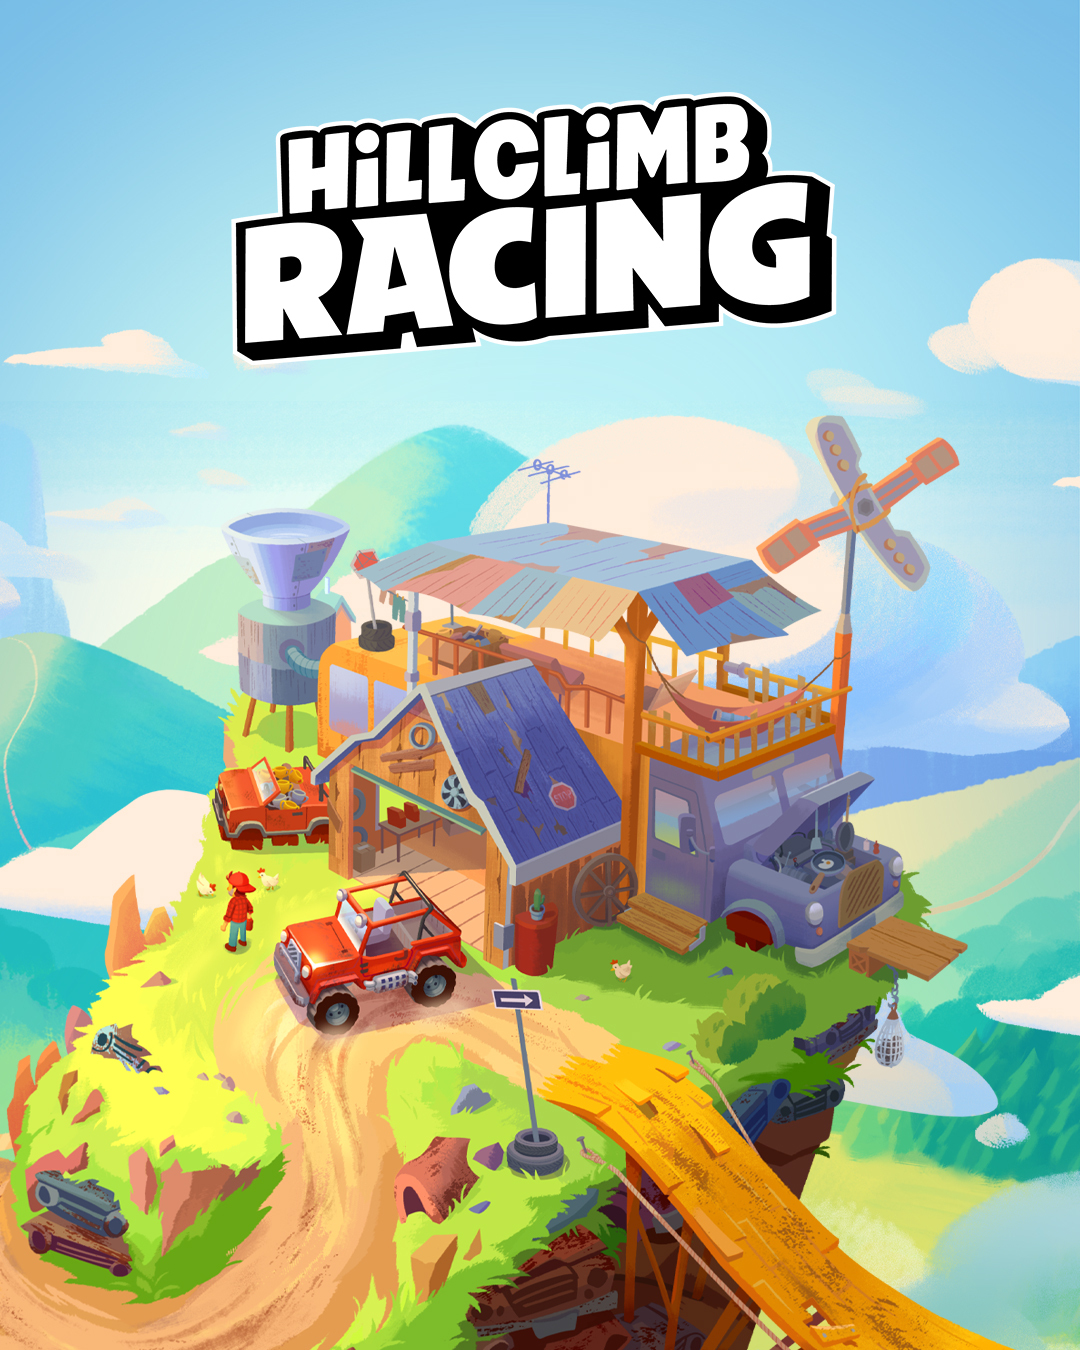 Hill Climb Racing - Today's awesome #FingerFanFridays fanart comes